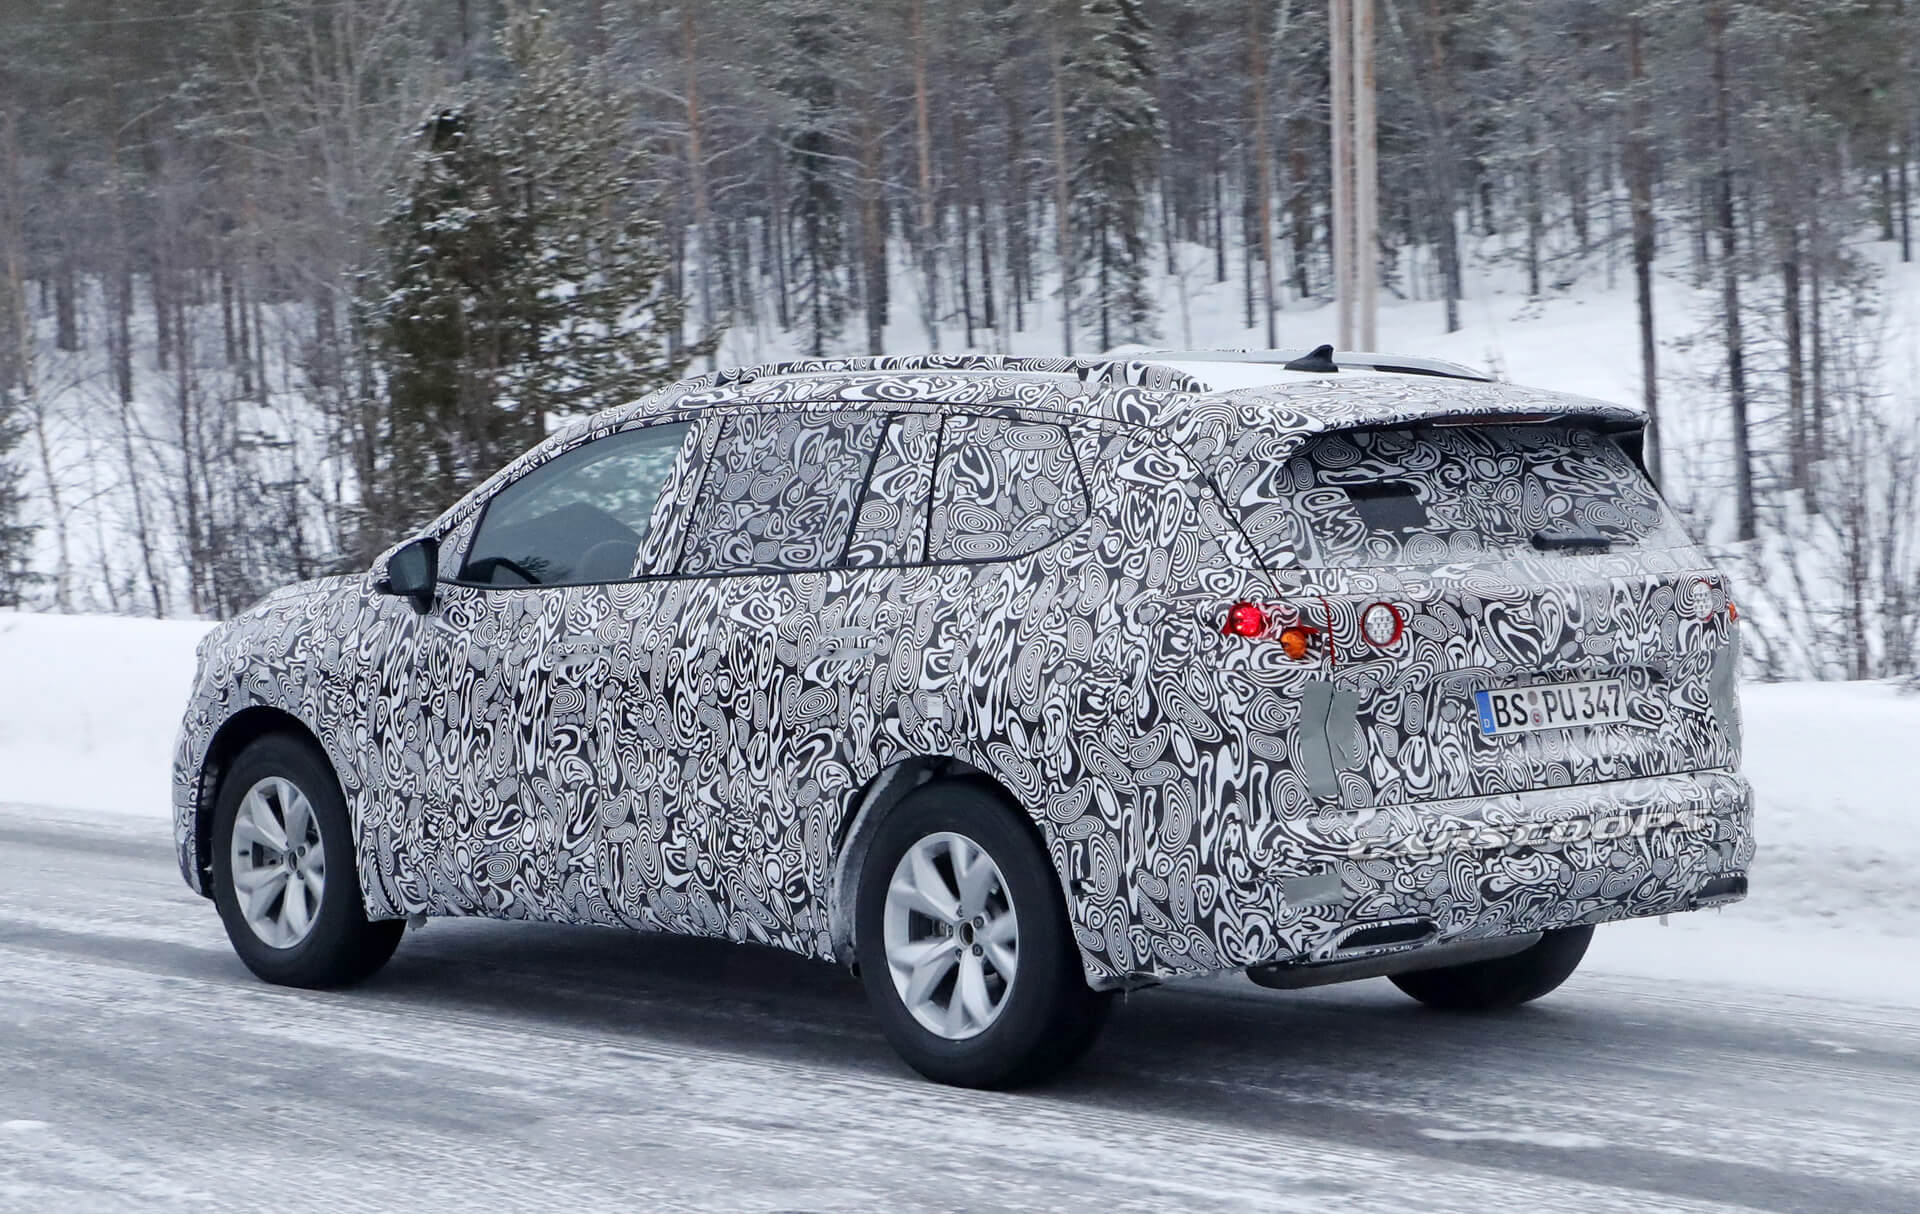 Vw S Super Sized 21 Smv Crossover Spied Testing In Europe Carscoops